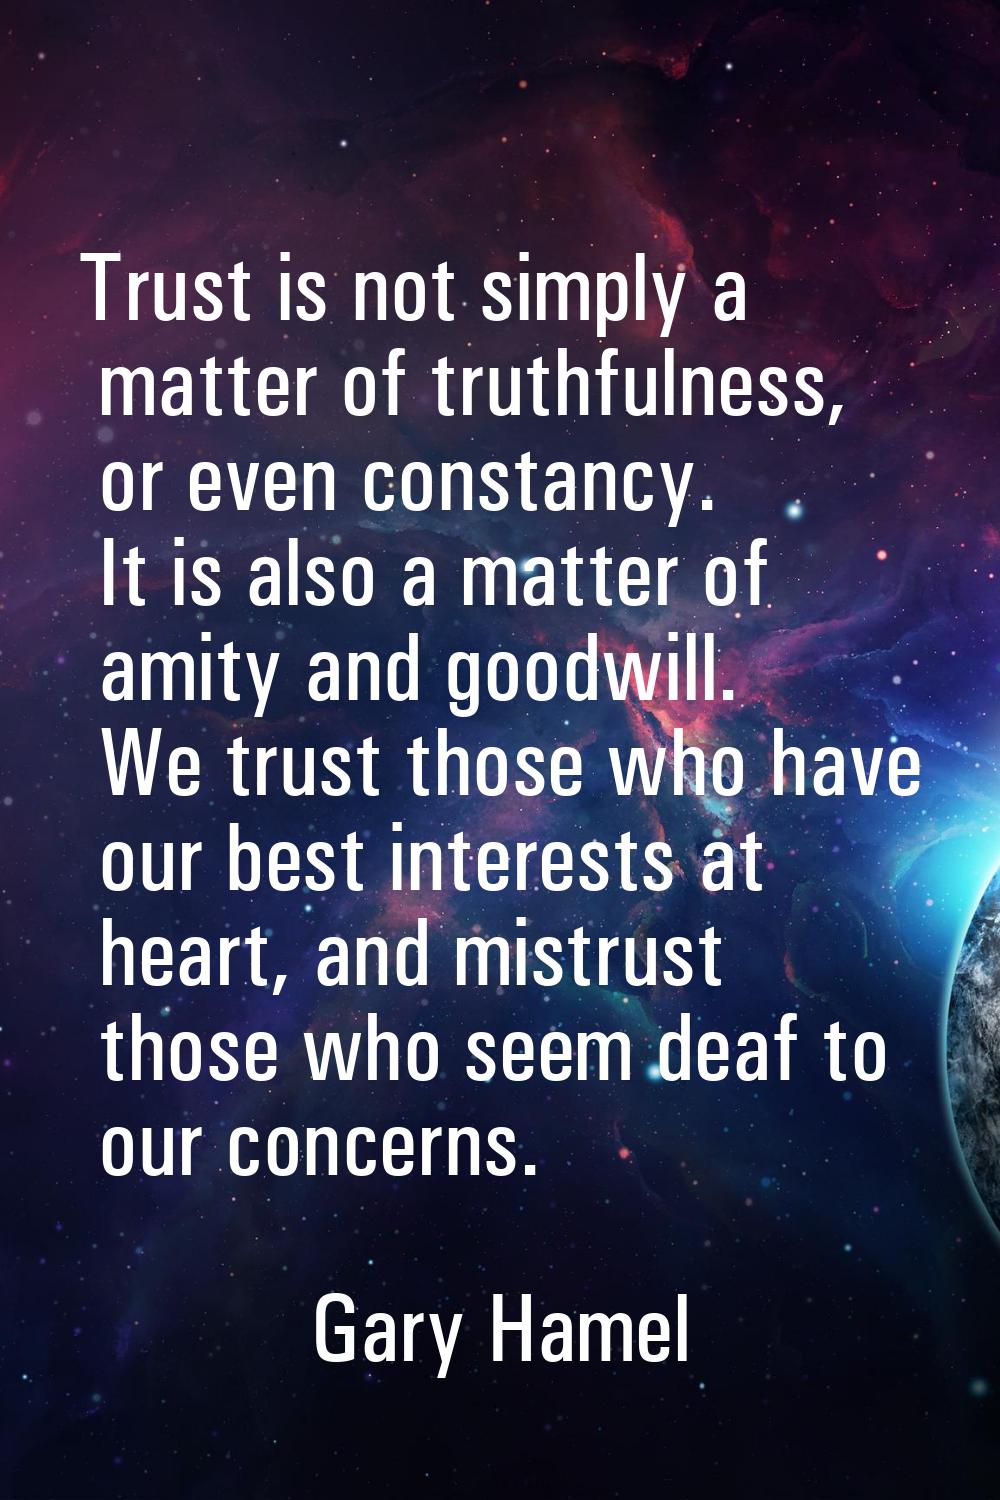 Trust is not simply a matter of truthfulness, or even constancy. It is also a matter of amity and g